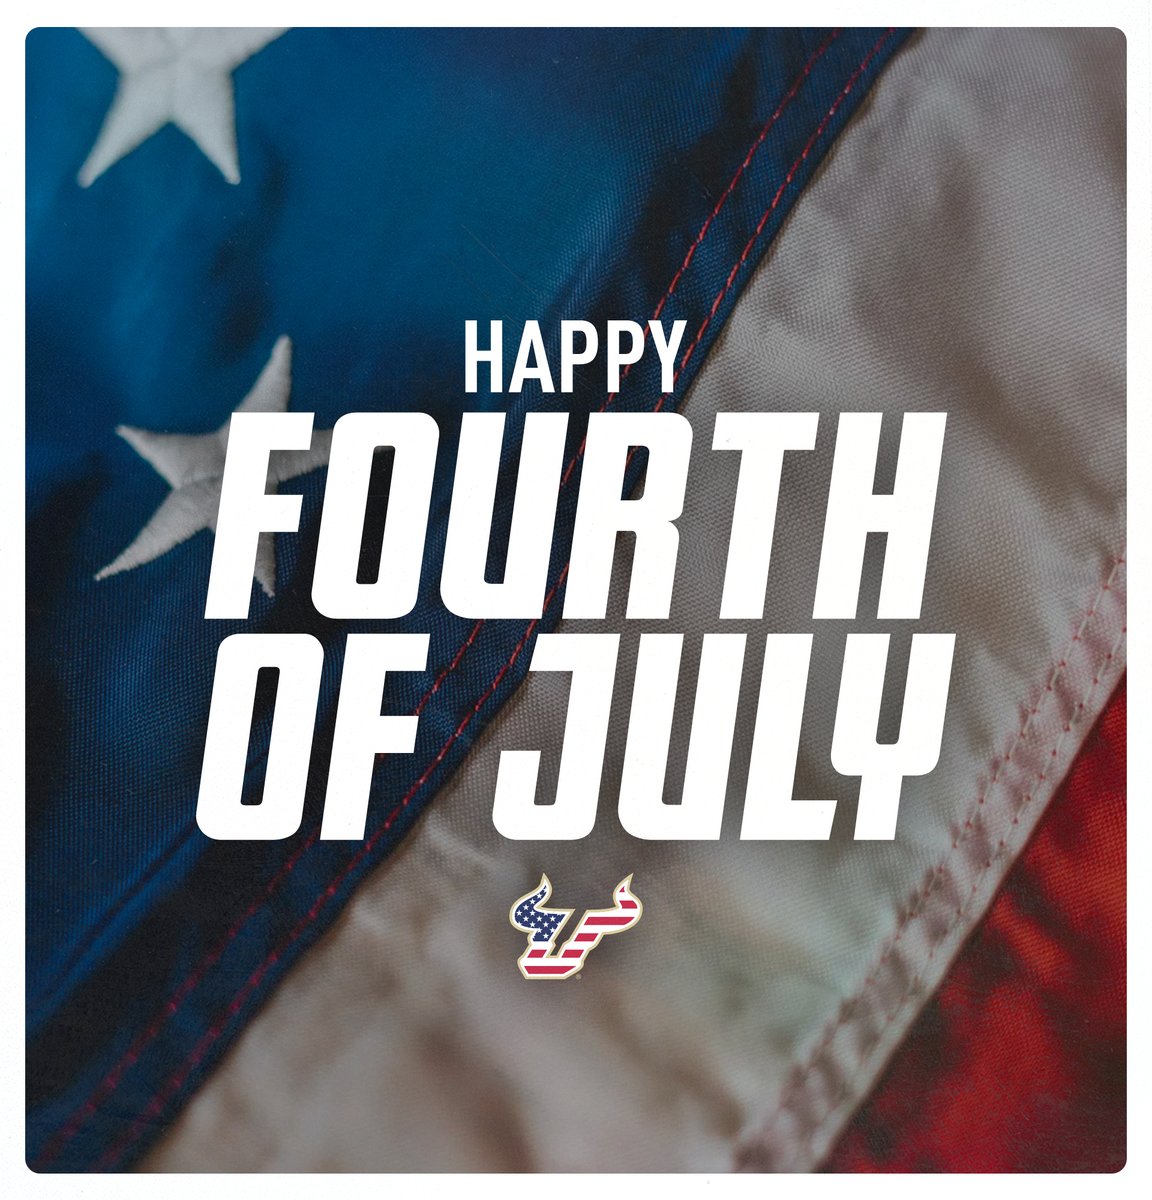 Today we hold true to the red, white and blue!
Happy Fourth of July! 
#HornsUp🤘| #HappyFourthOfJuly